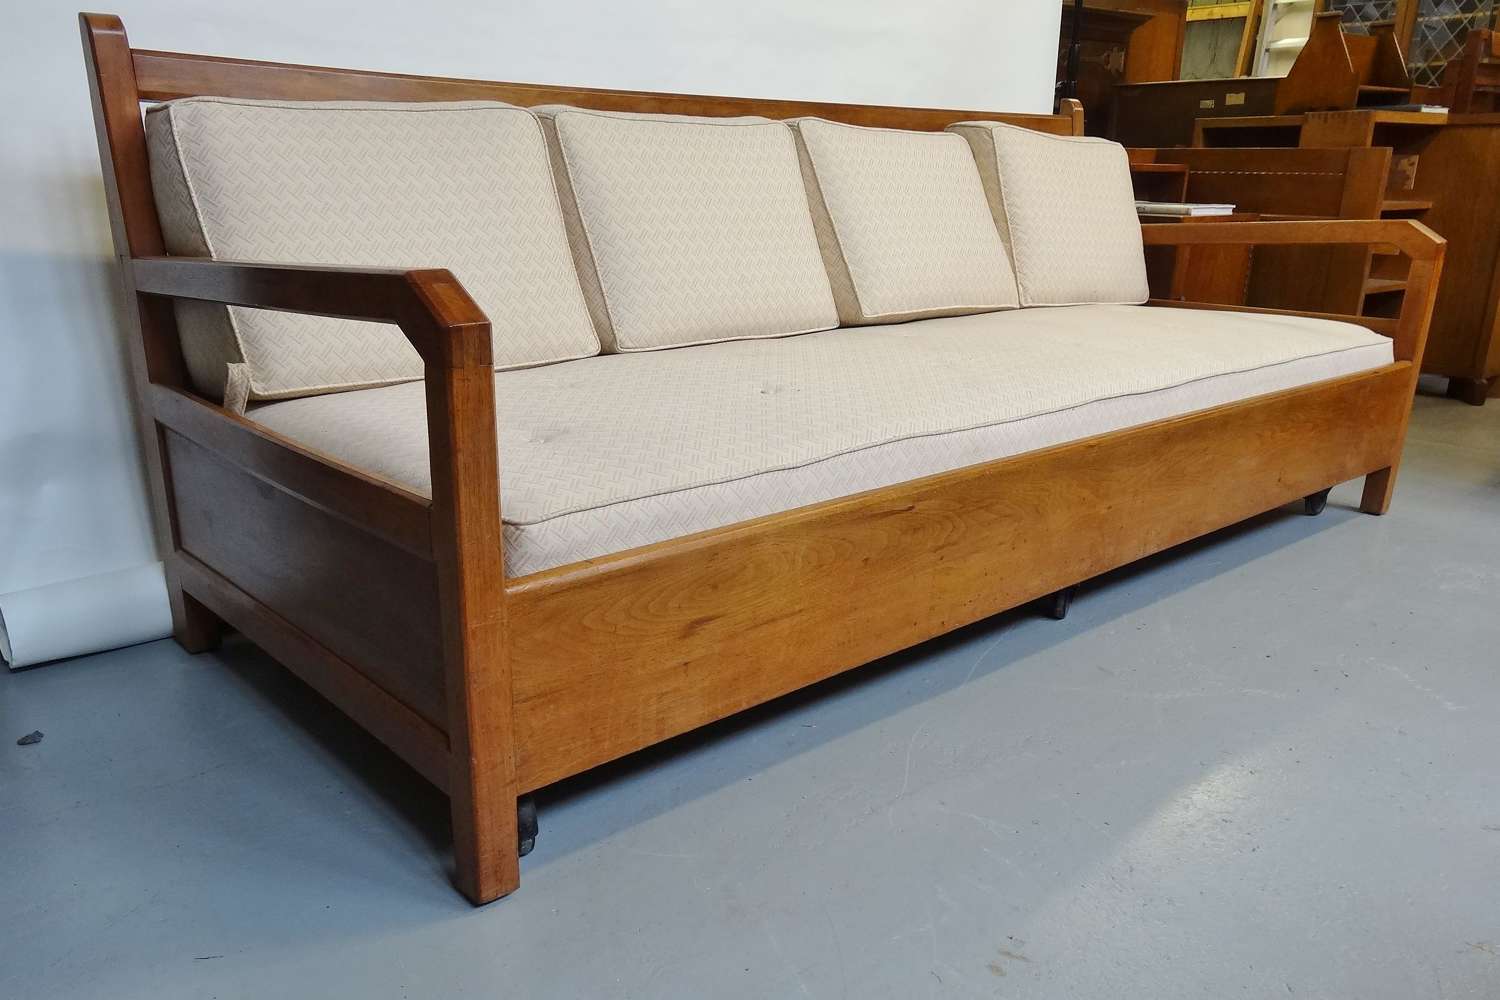 Edward Barnsley Cotswold School Arts & Crafts long settle day bed